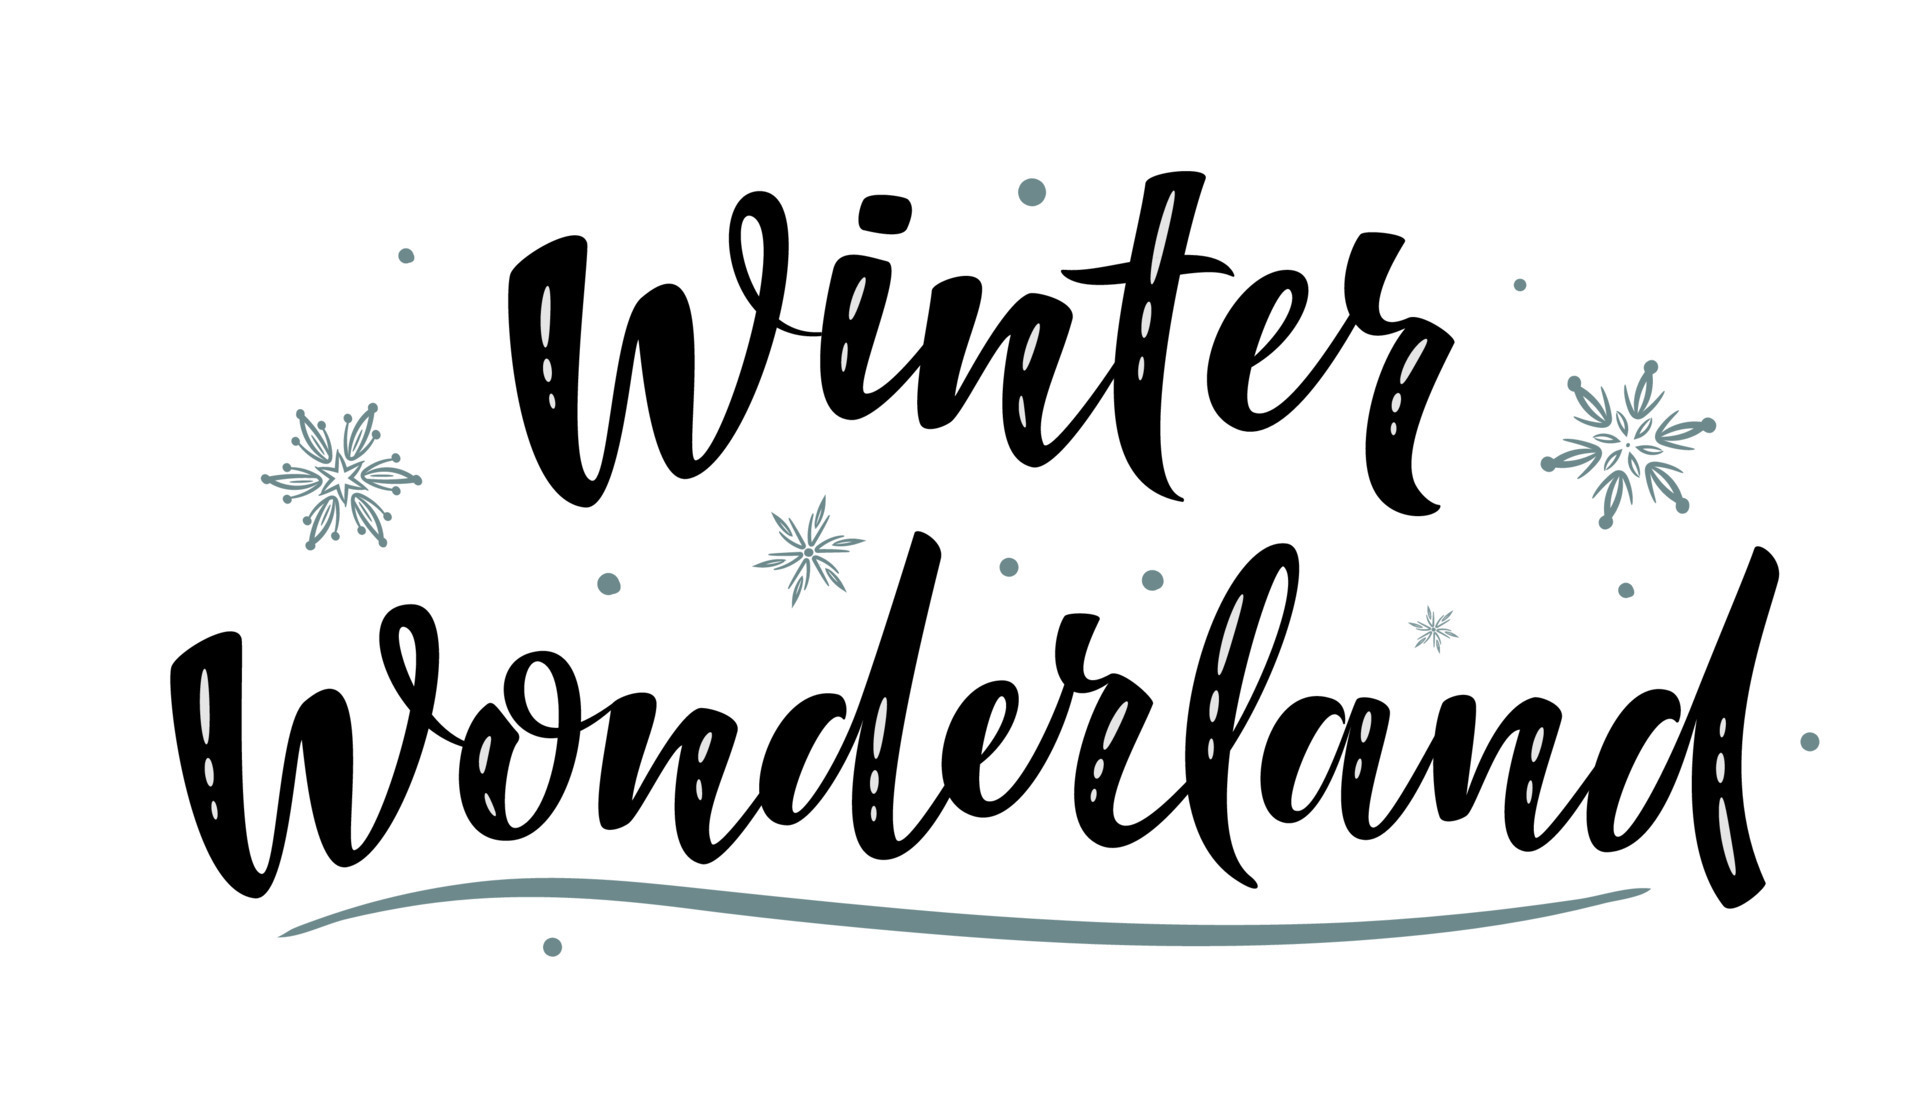 Winter wonderland. Hand drawn simple lettering sign with